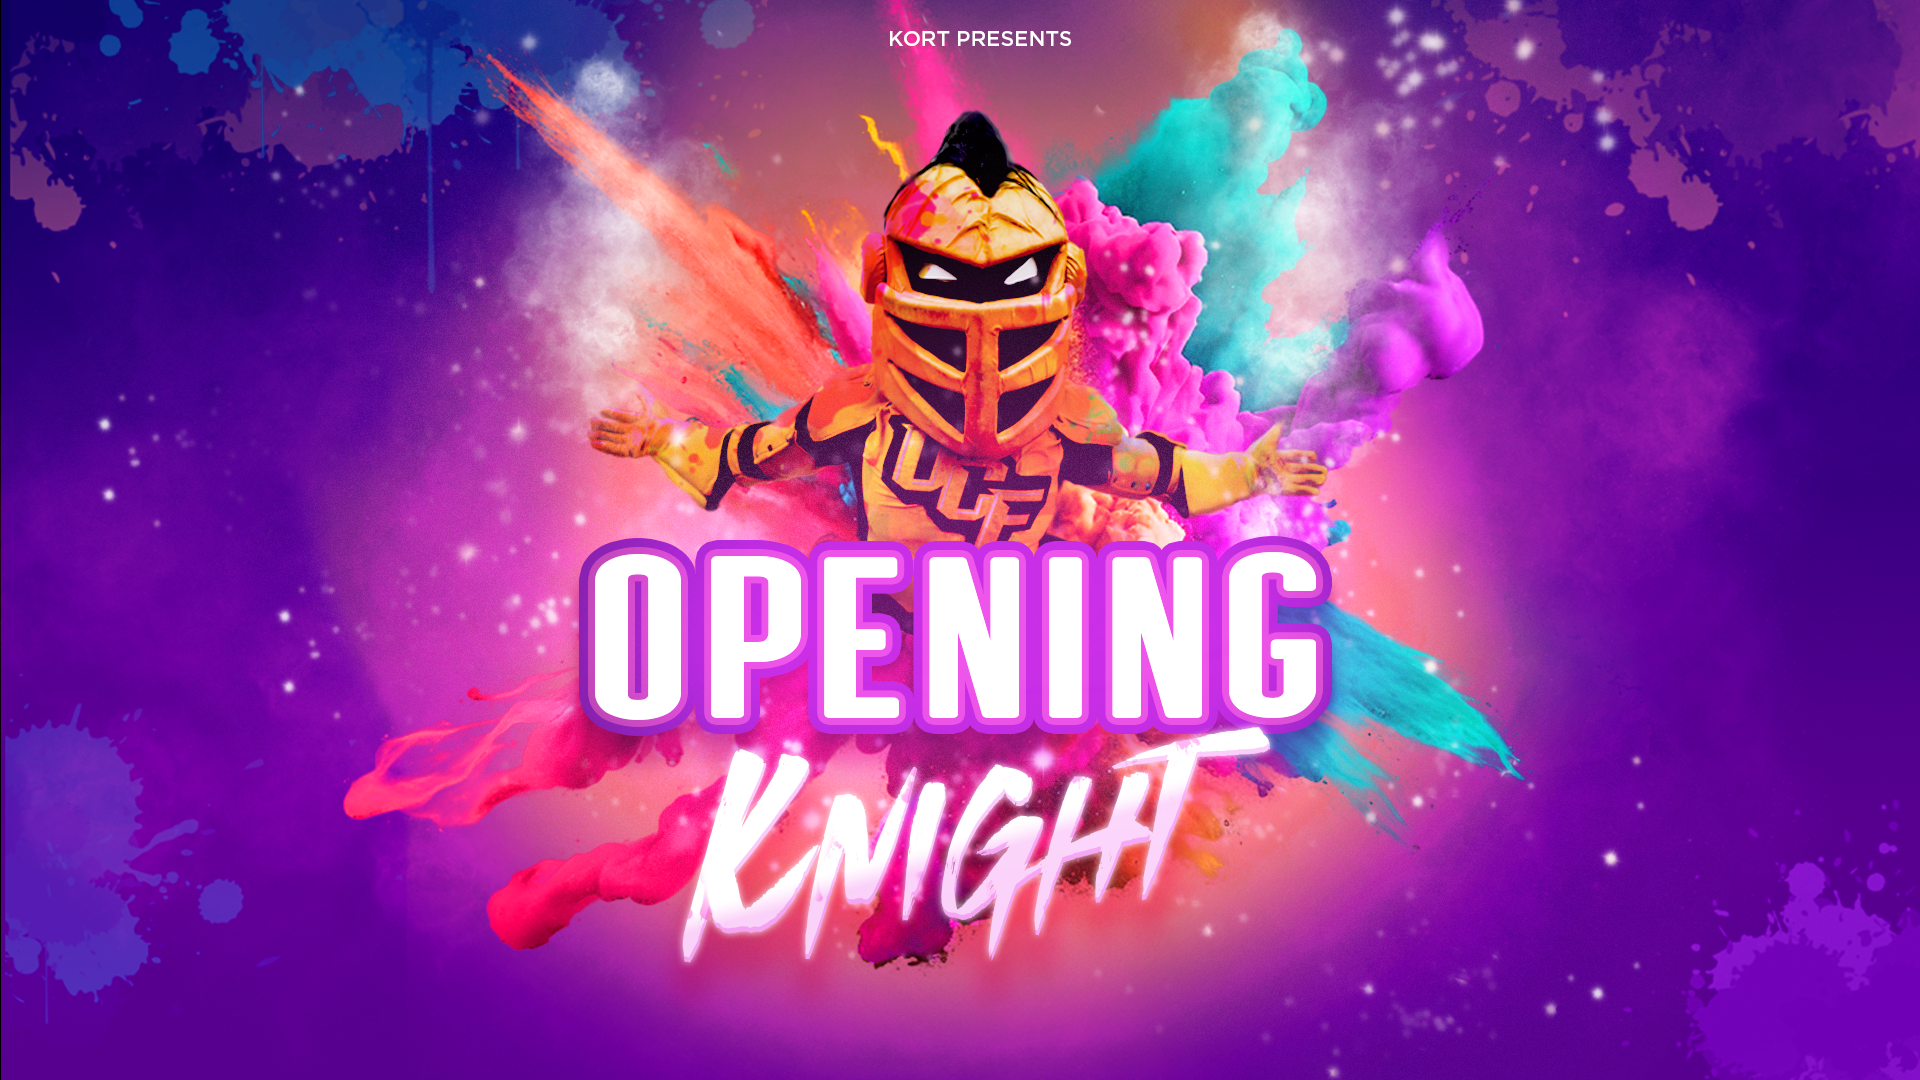 Colorful illustration of UCF mascot in the middle with the text that says Opening Knight